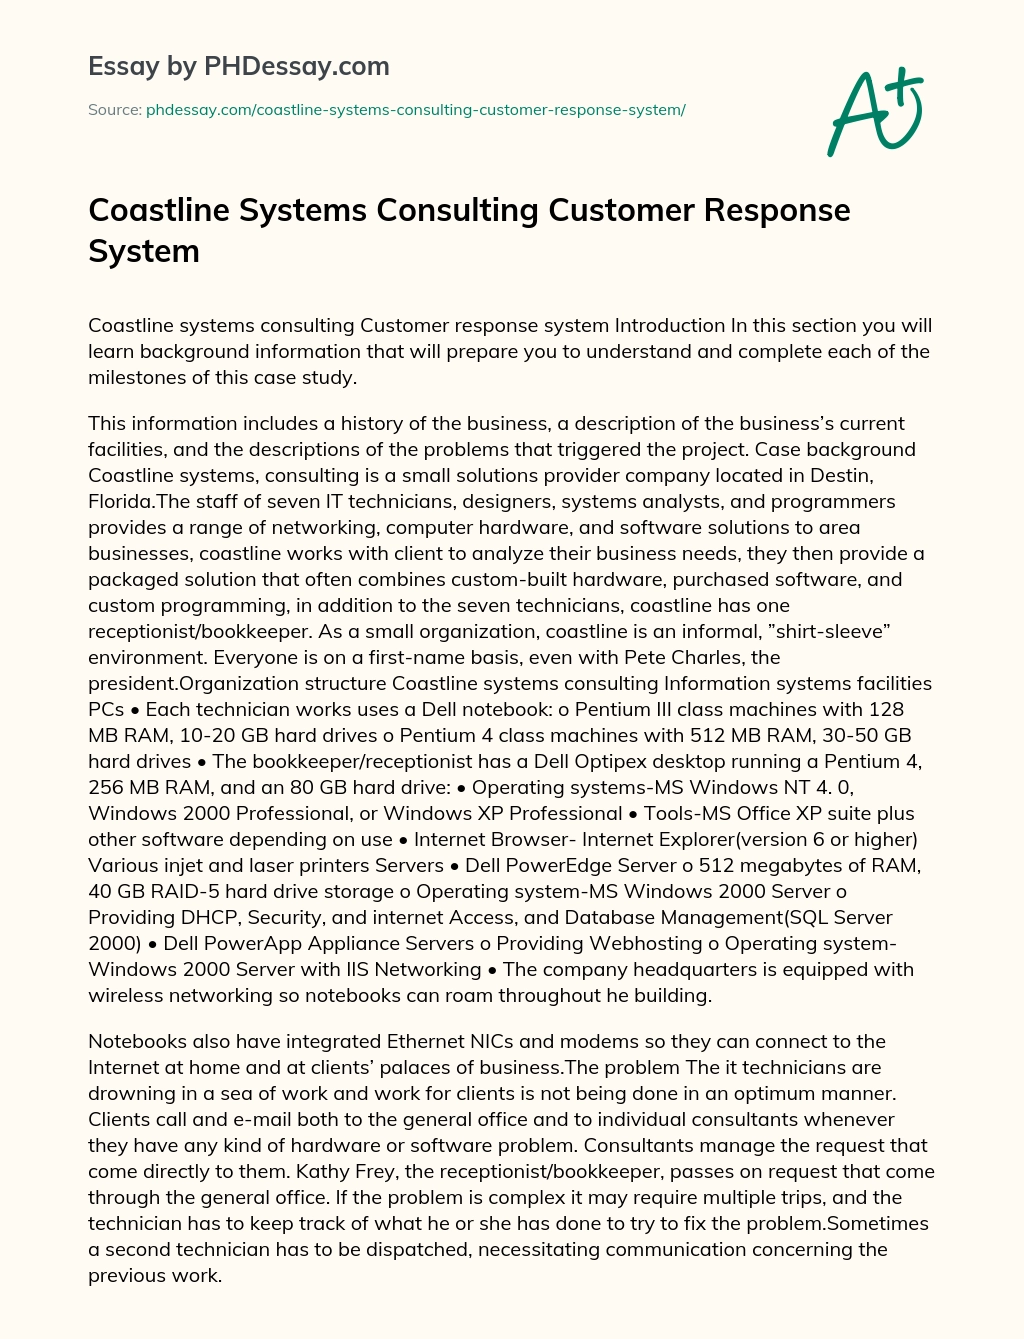 Coastline Systems Consulting Customer Response System essay